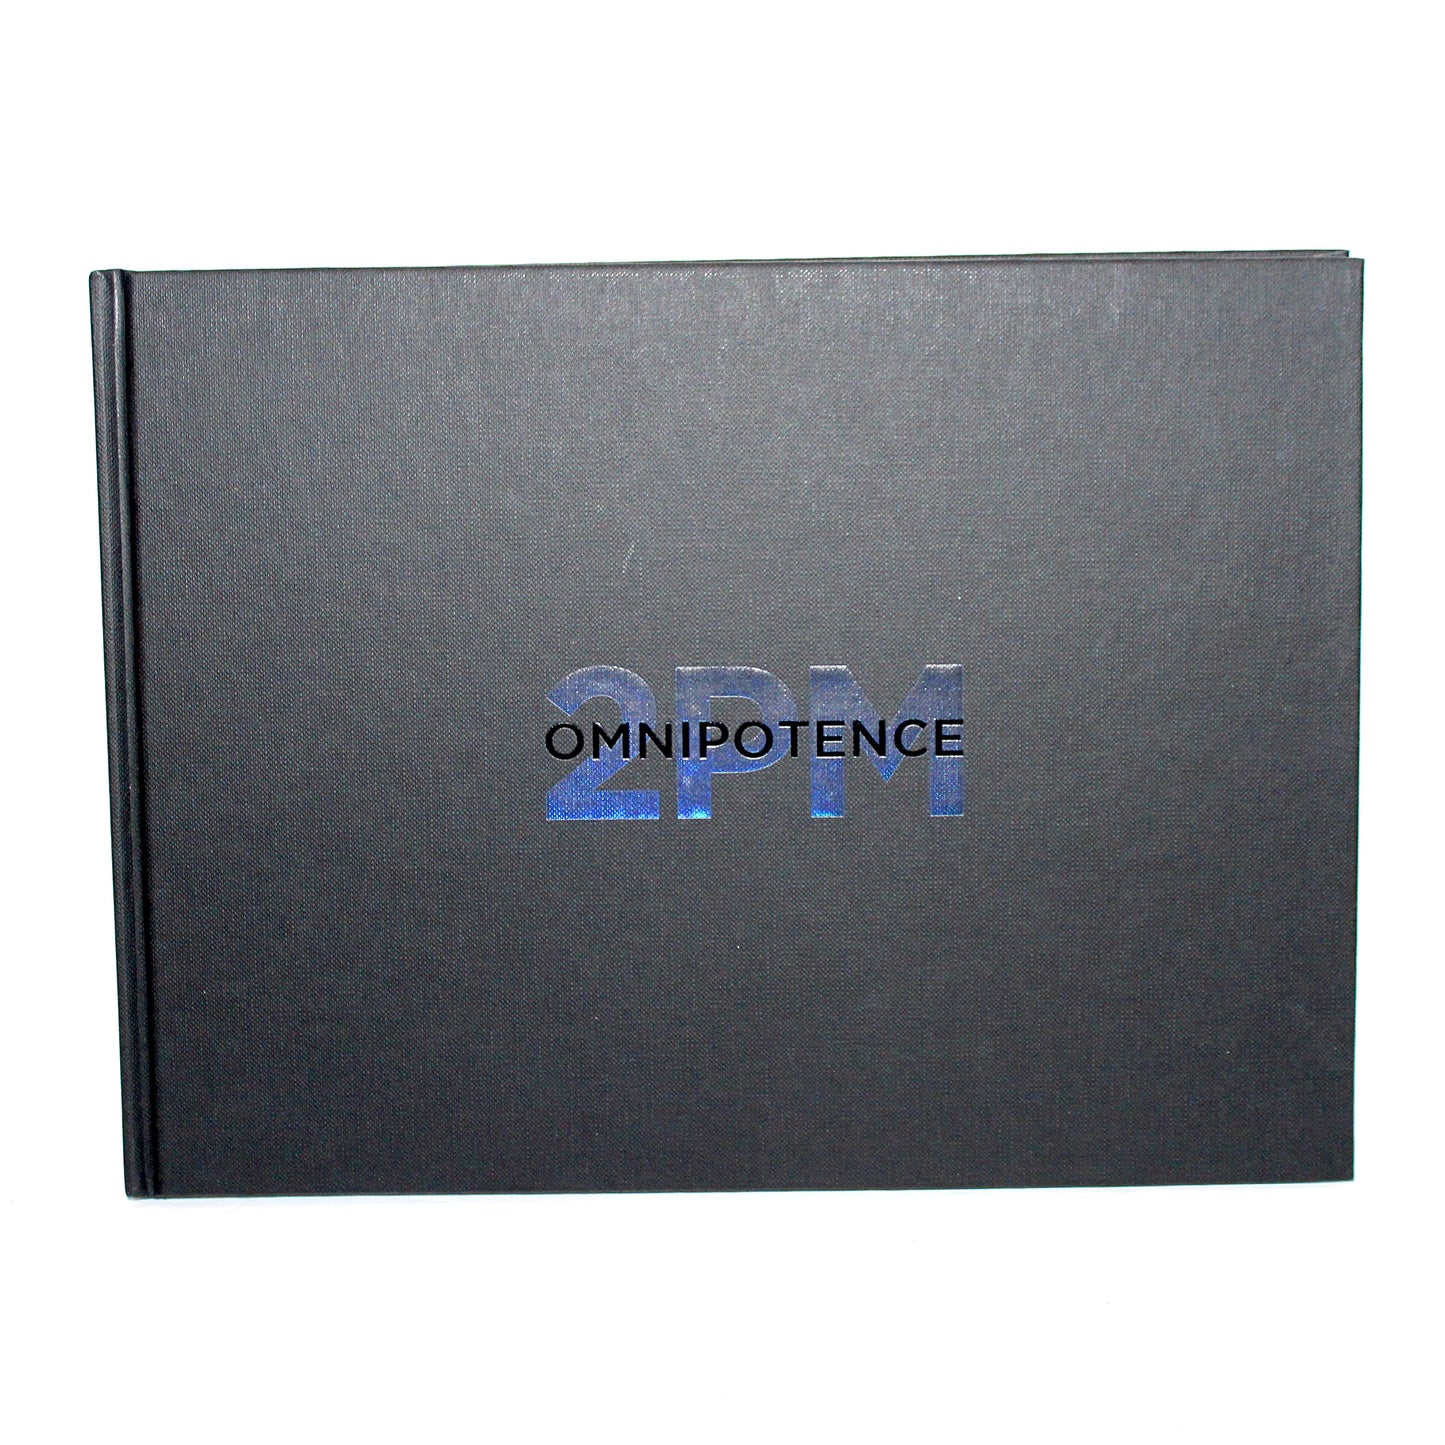 2PM Concept Photobook: OMNIPOTENCE